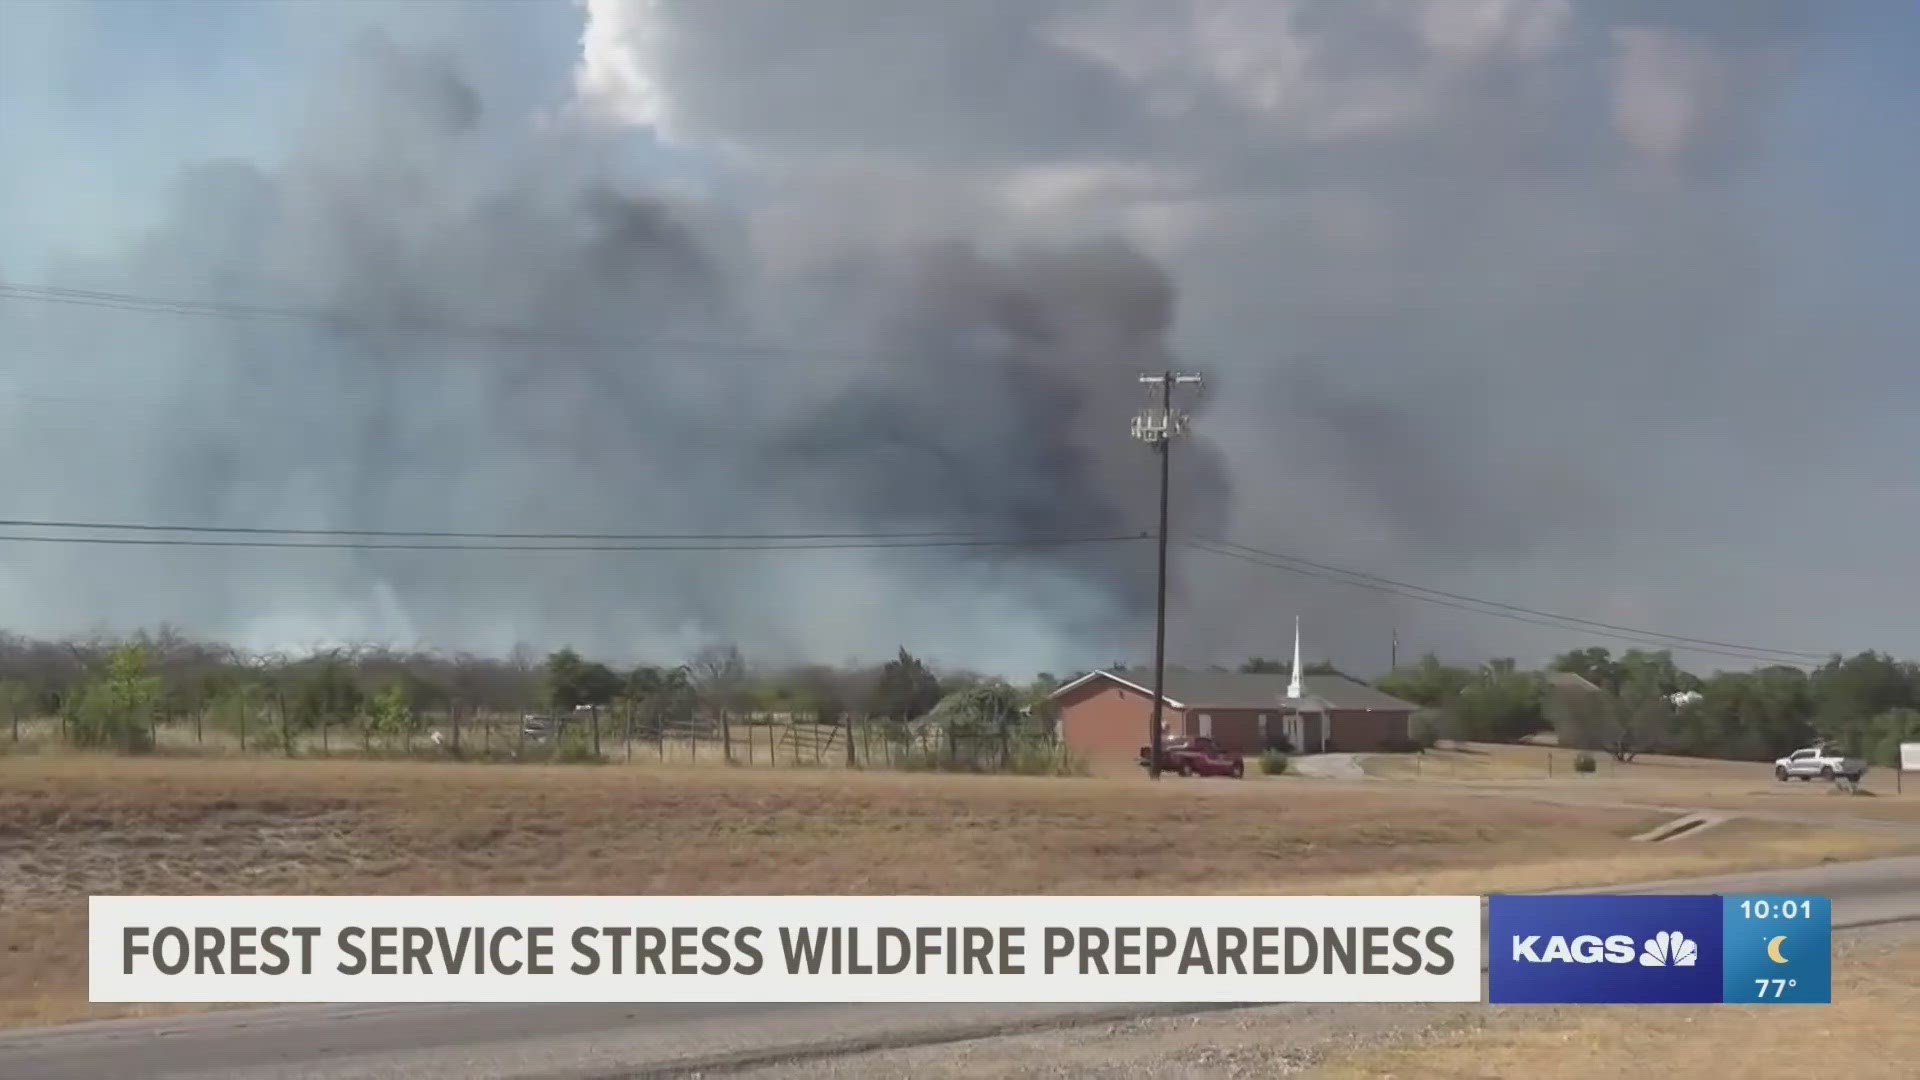 With wildfire season in Texas multiple months away, Karen Stafford of the Texas A&M Forest Service gives tips on how to prepare now before the drier months.